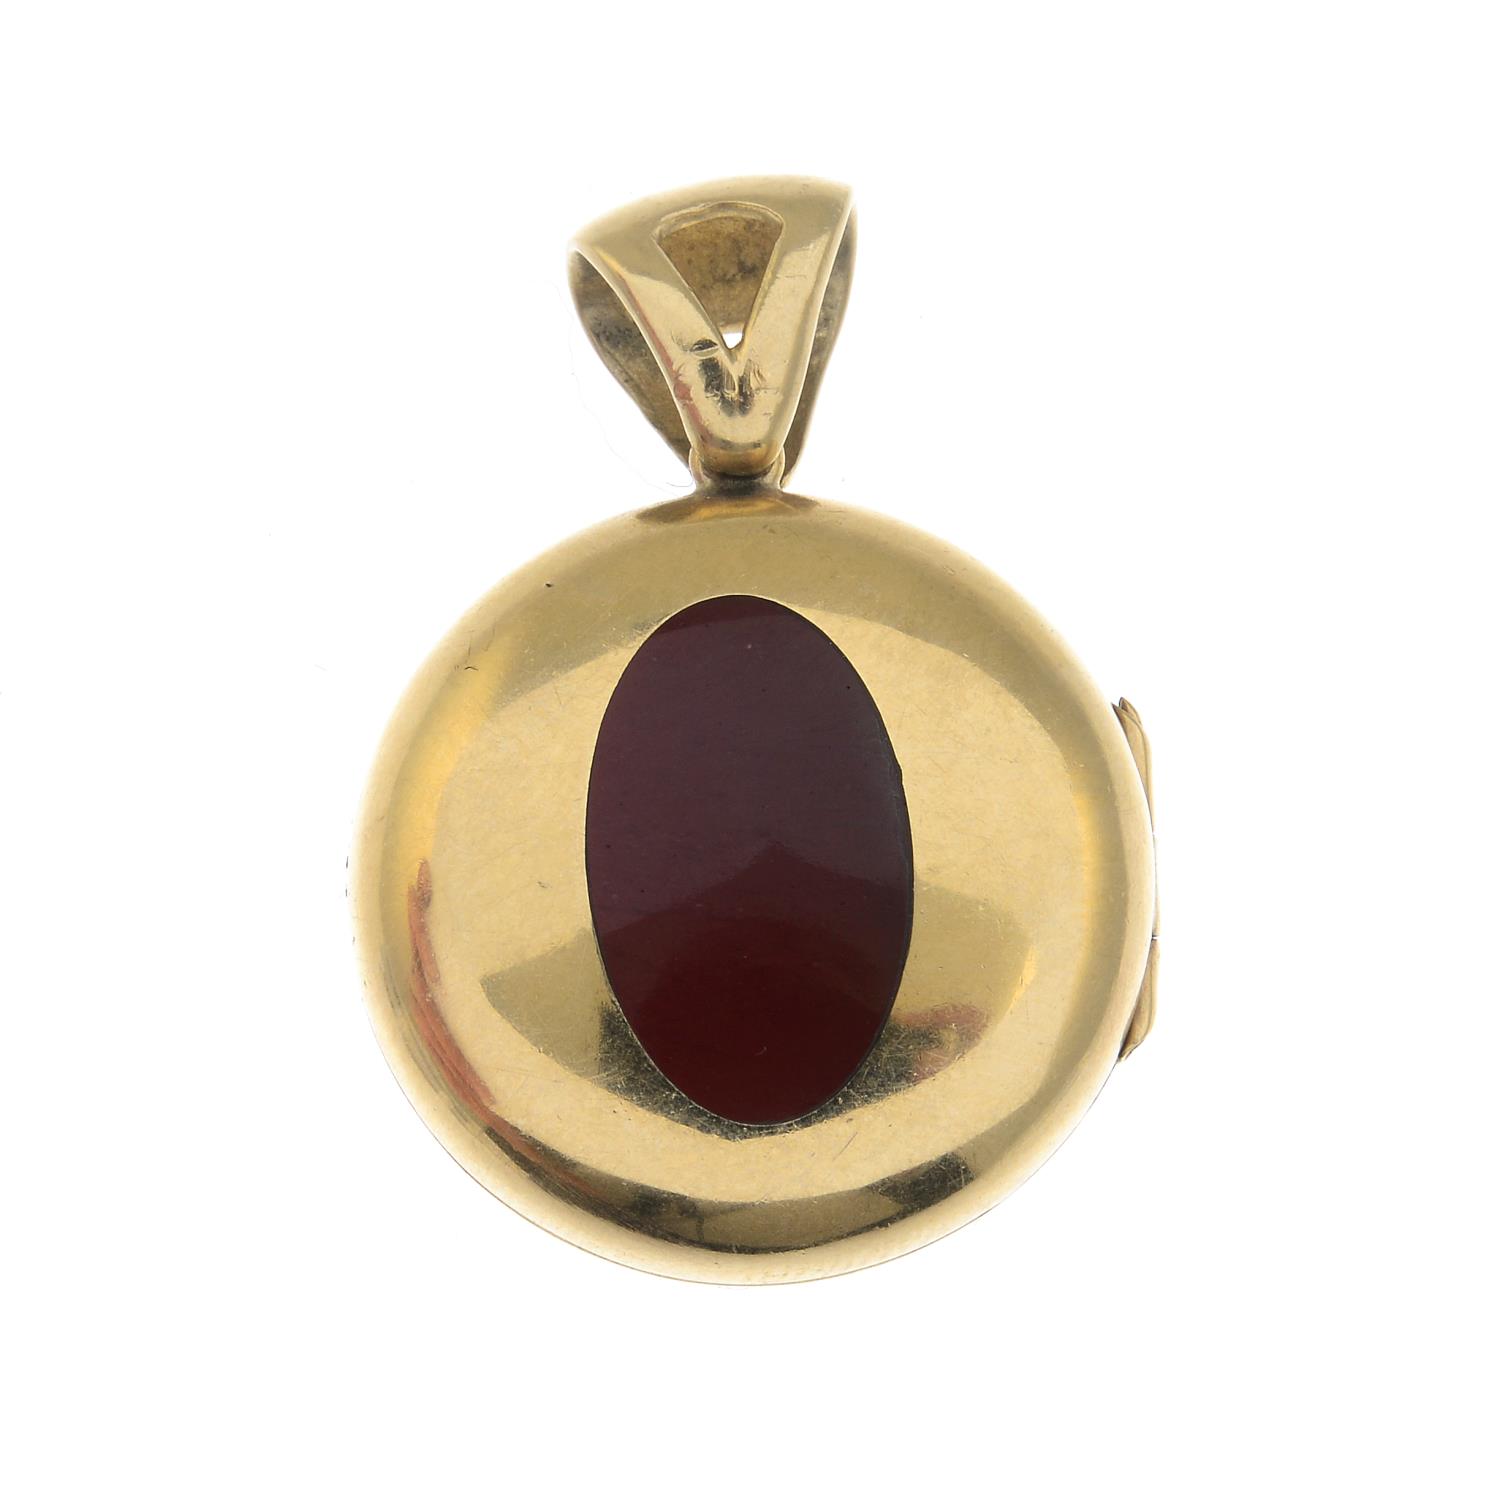 A 9ct gold banded agate and jasper locket pendant.Hallmarks for 9ct gold. - Image 2 of 2